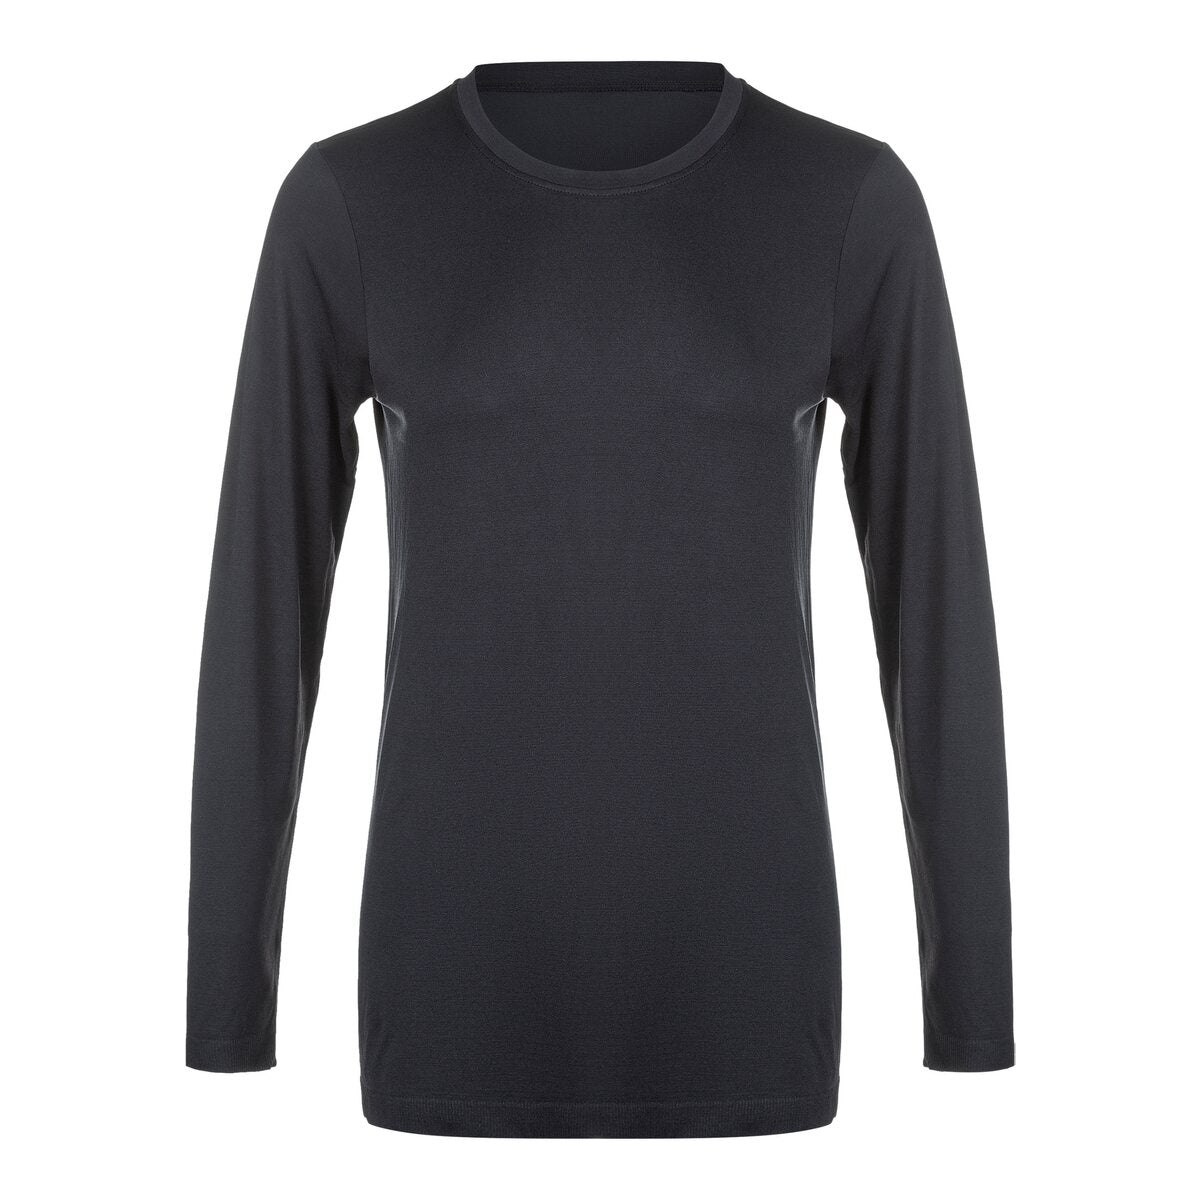 Athlecia Julee Womenswear Loose Fit Long Sleeve Seamless Tee - Black 6 Shaws Department Stores